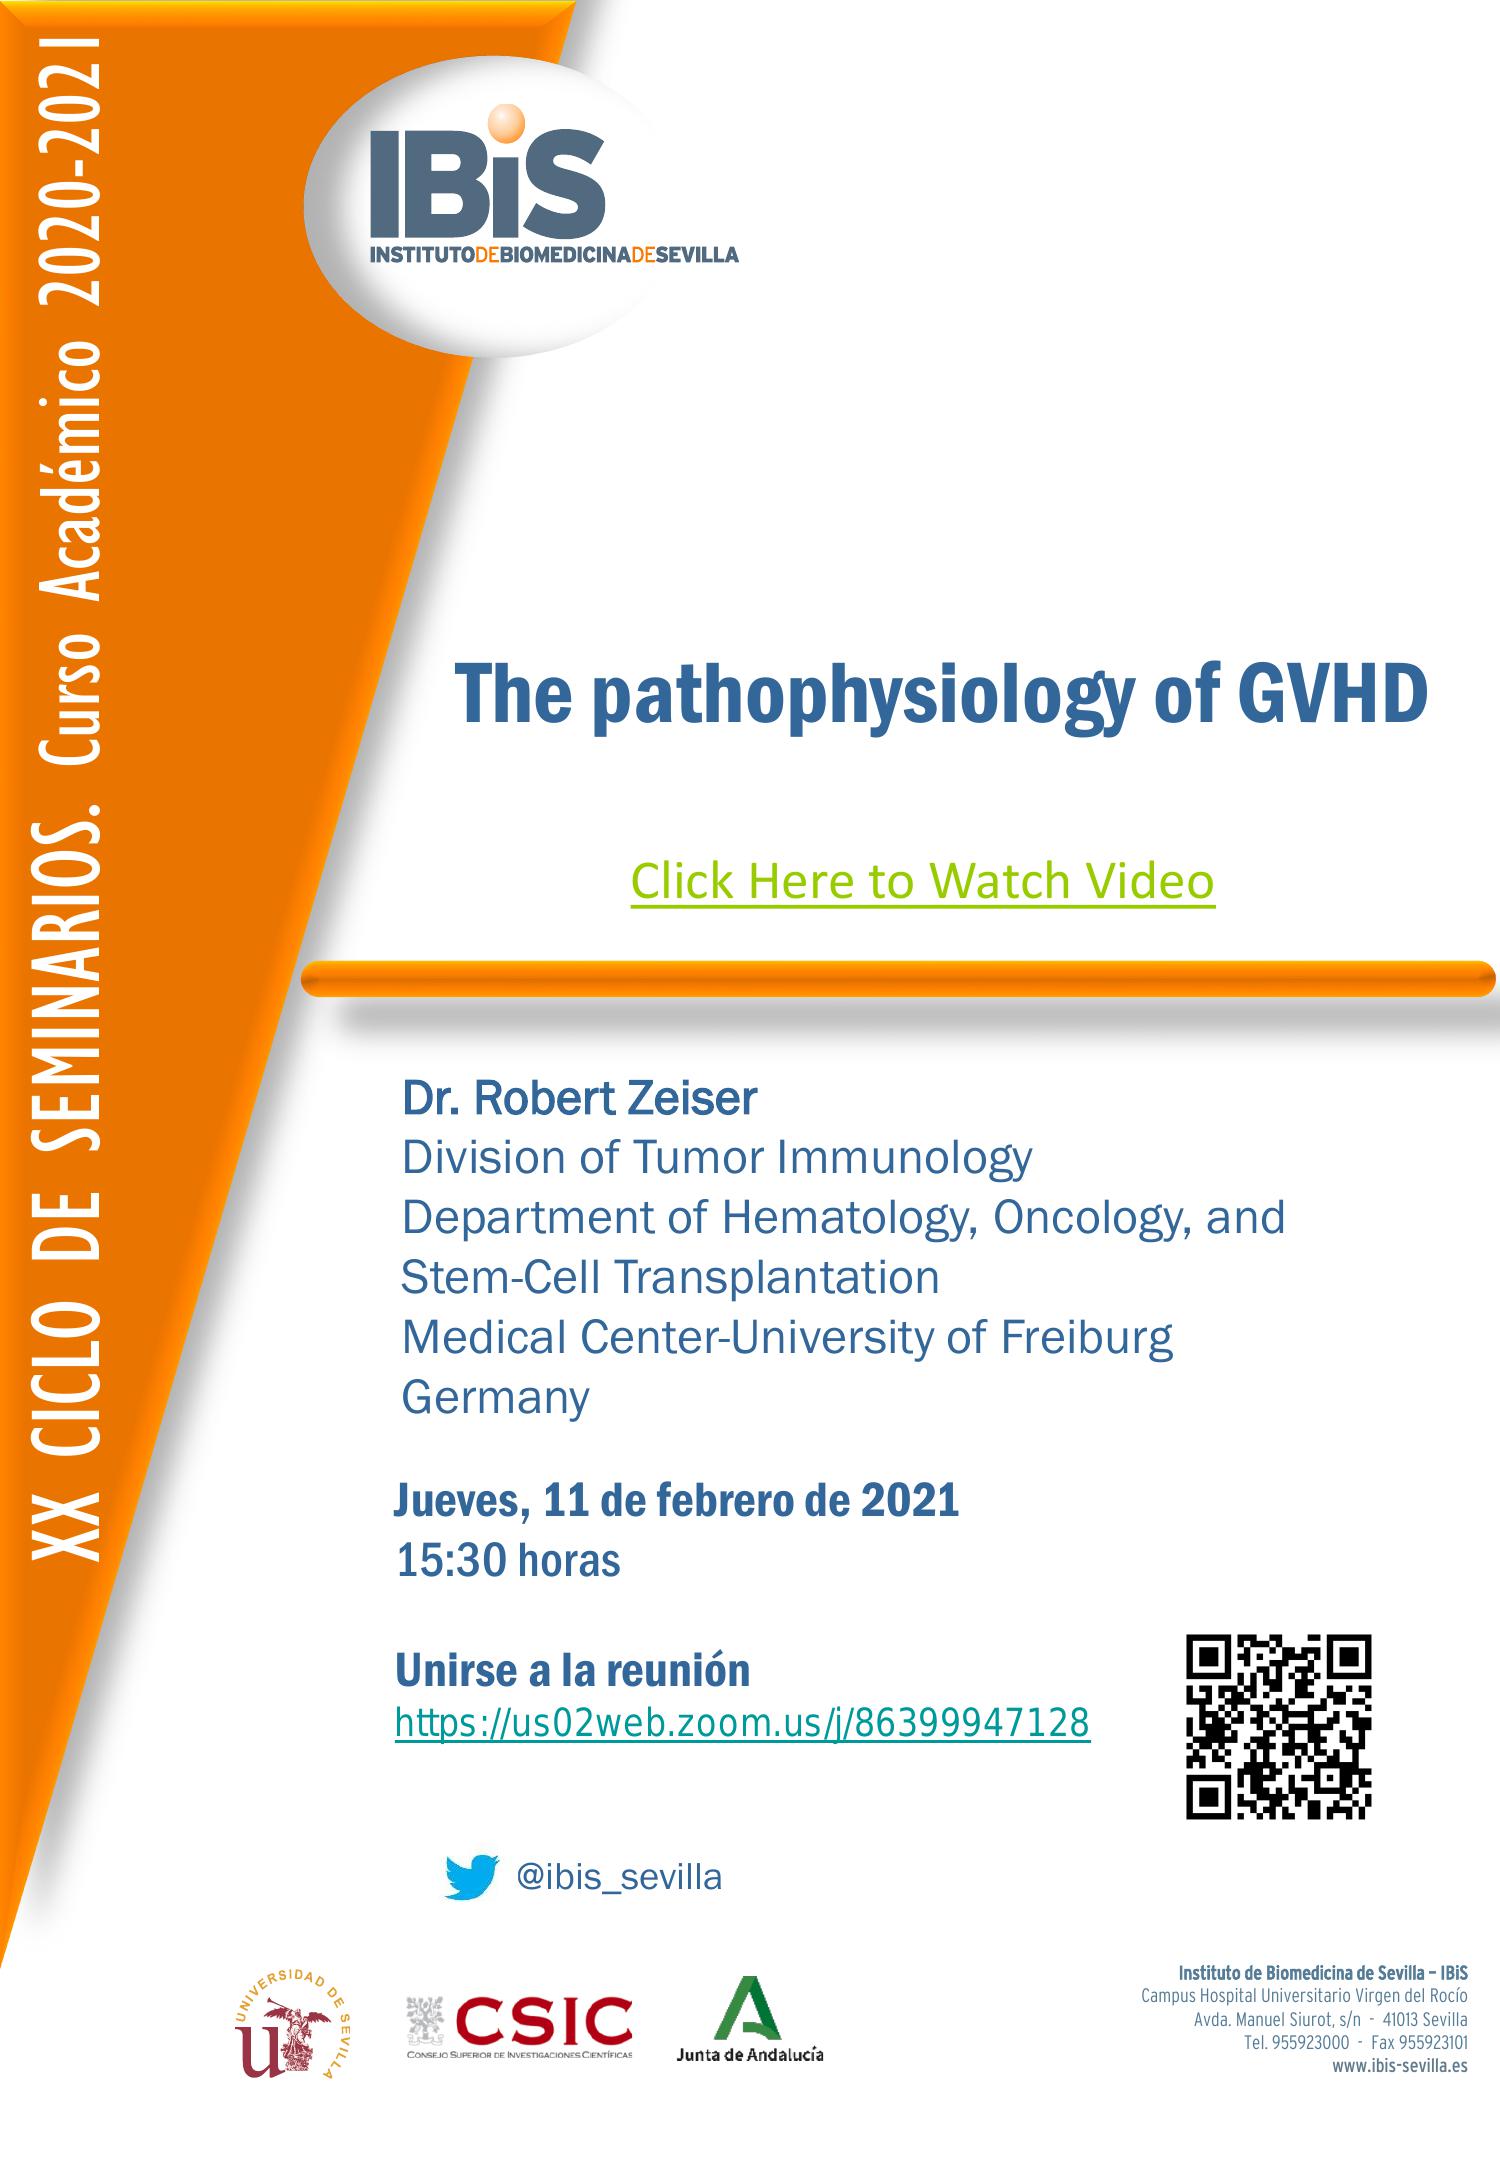 Poster: The pathophysiology of GVHD